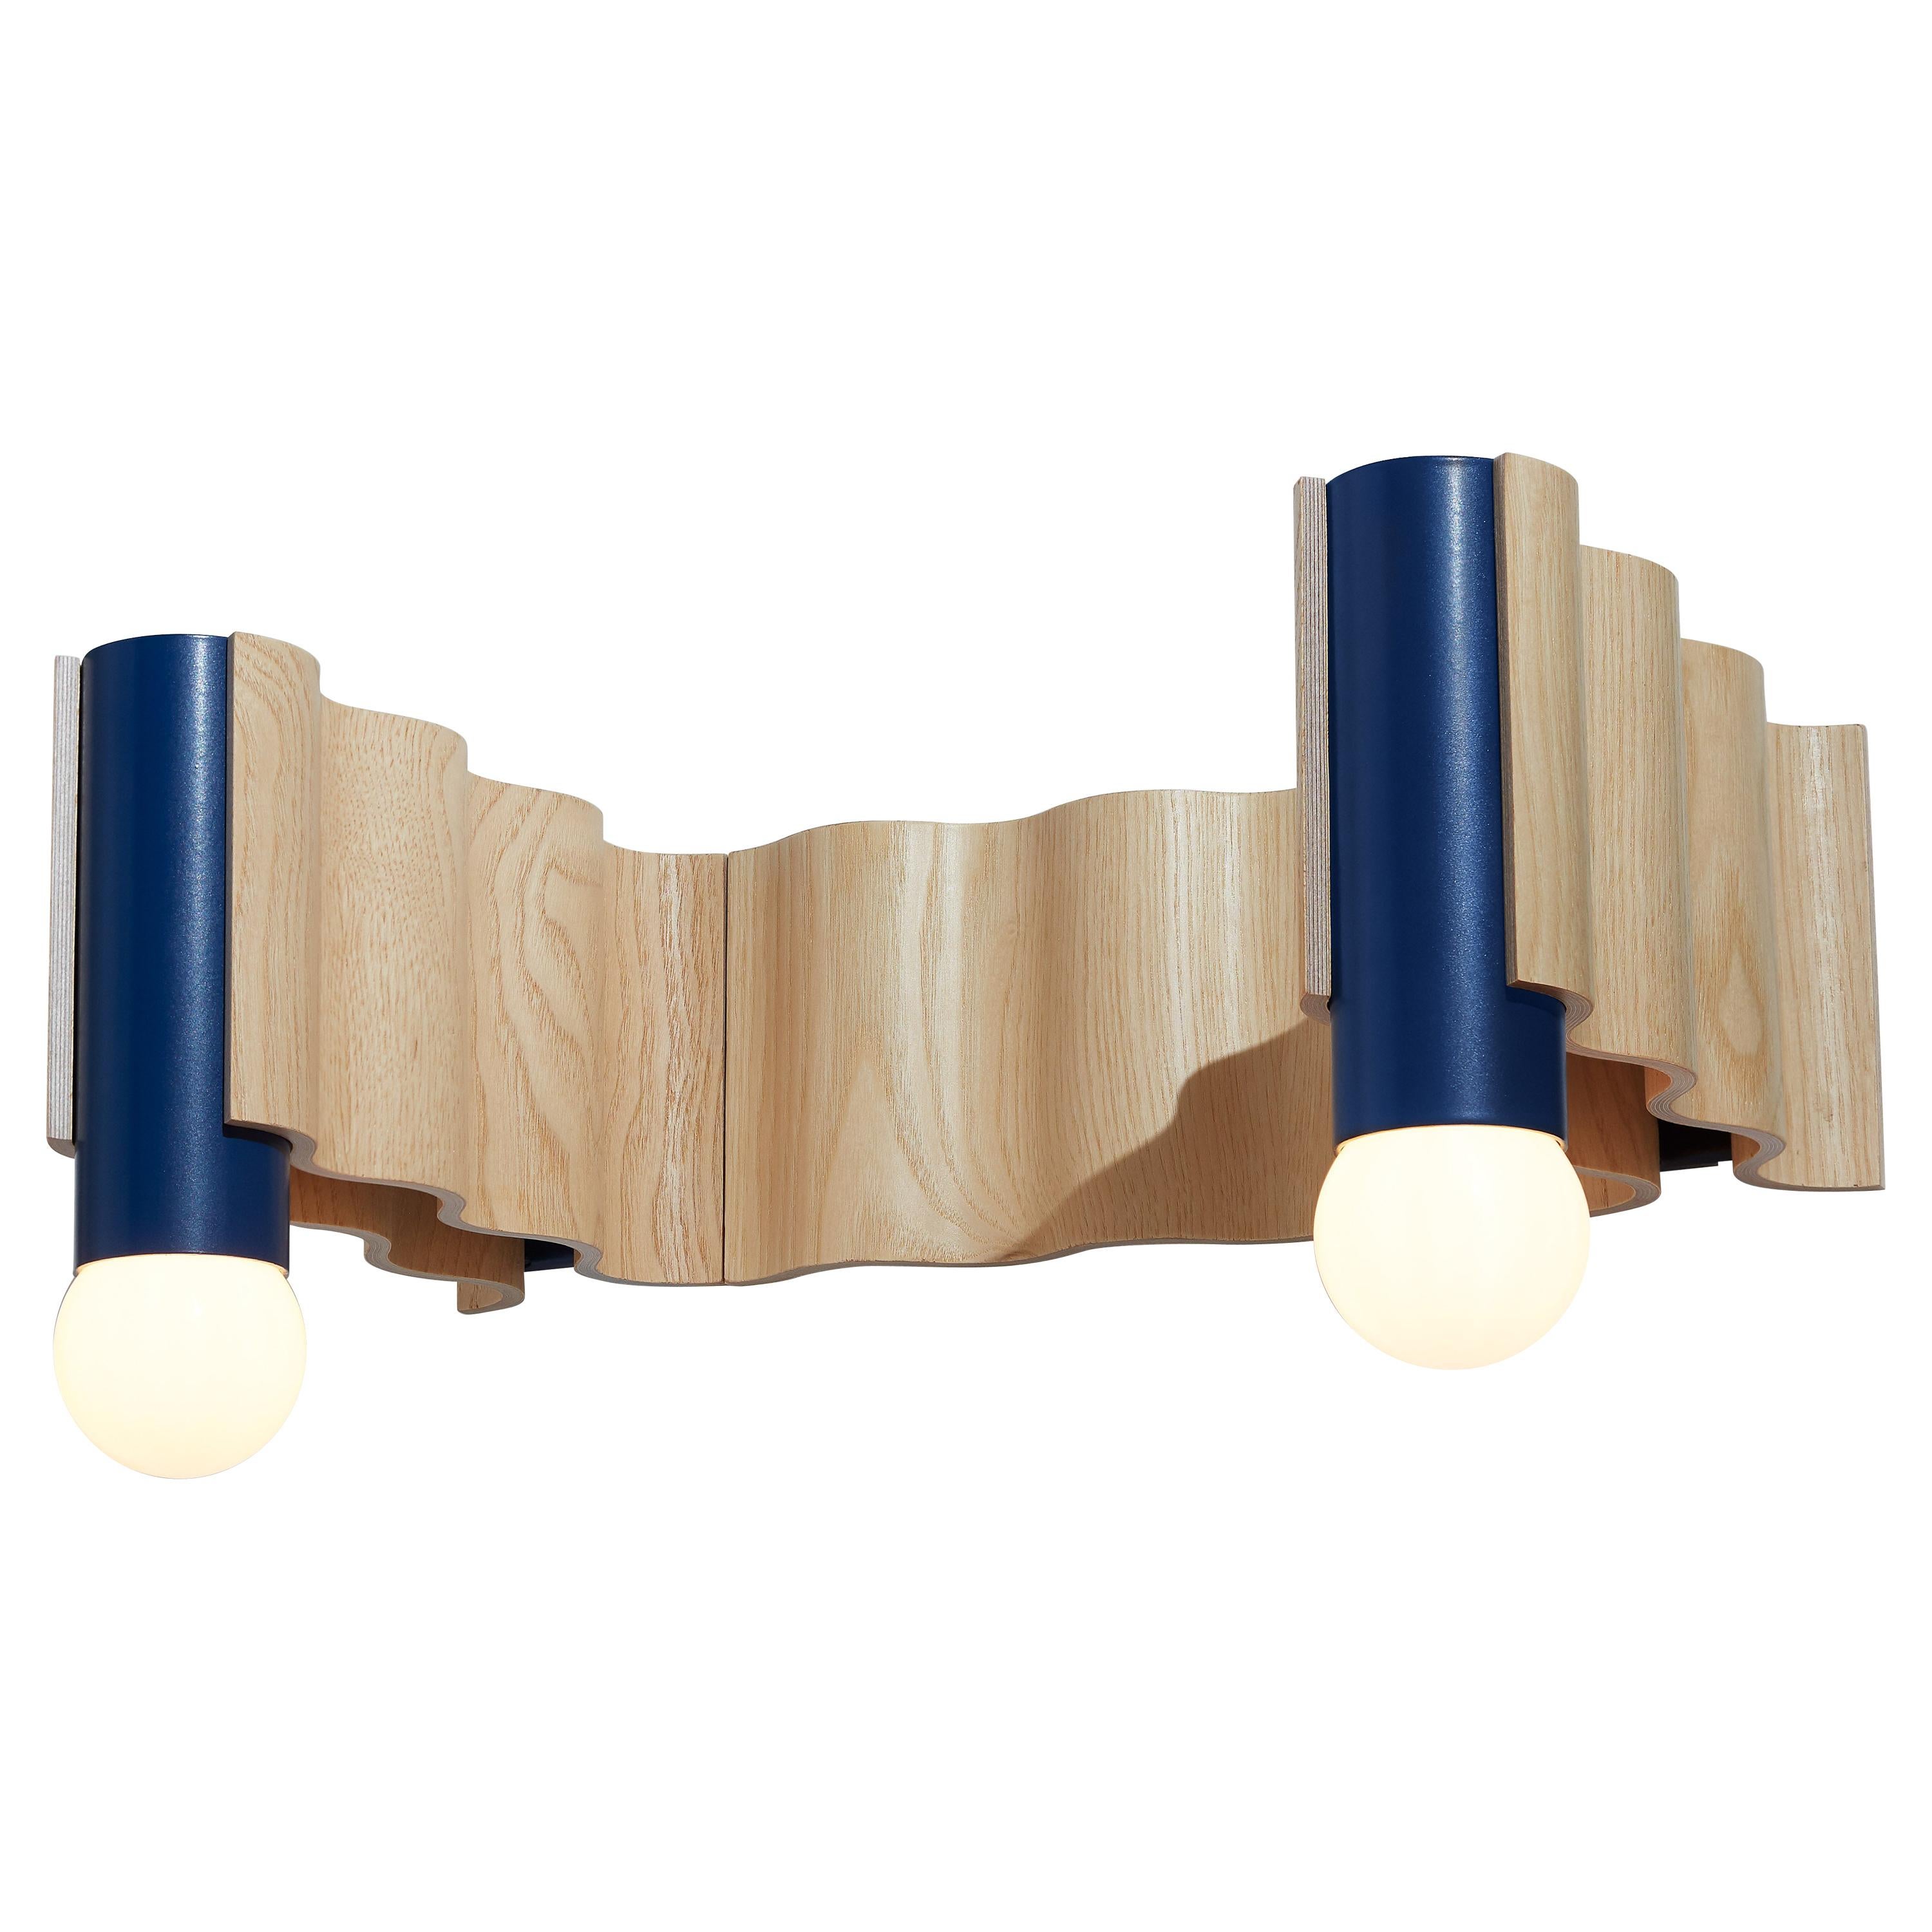 Corrugation Lights Textured Double Sconce by Theodora Alfredsdottir For Sale